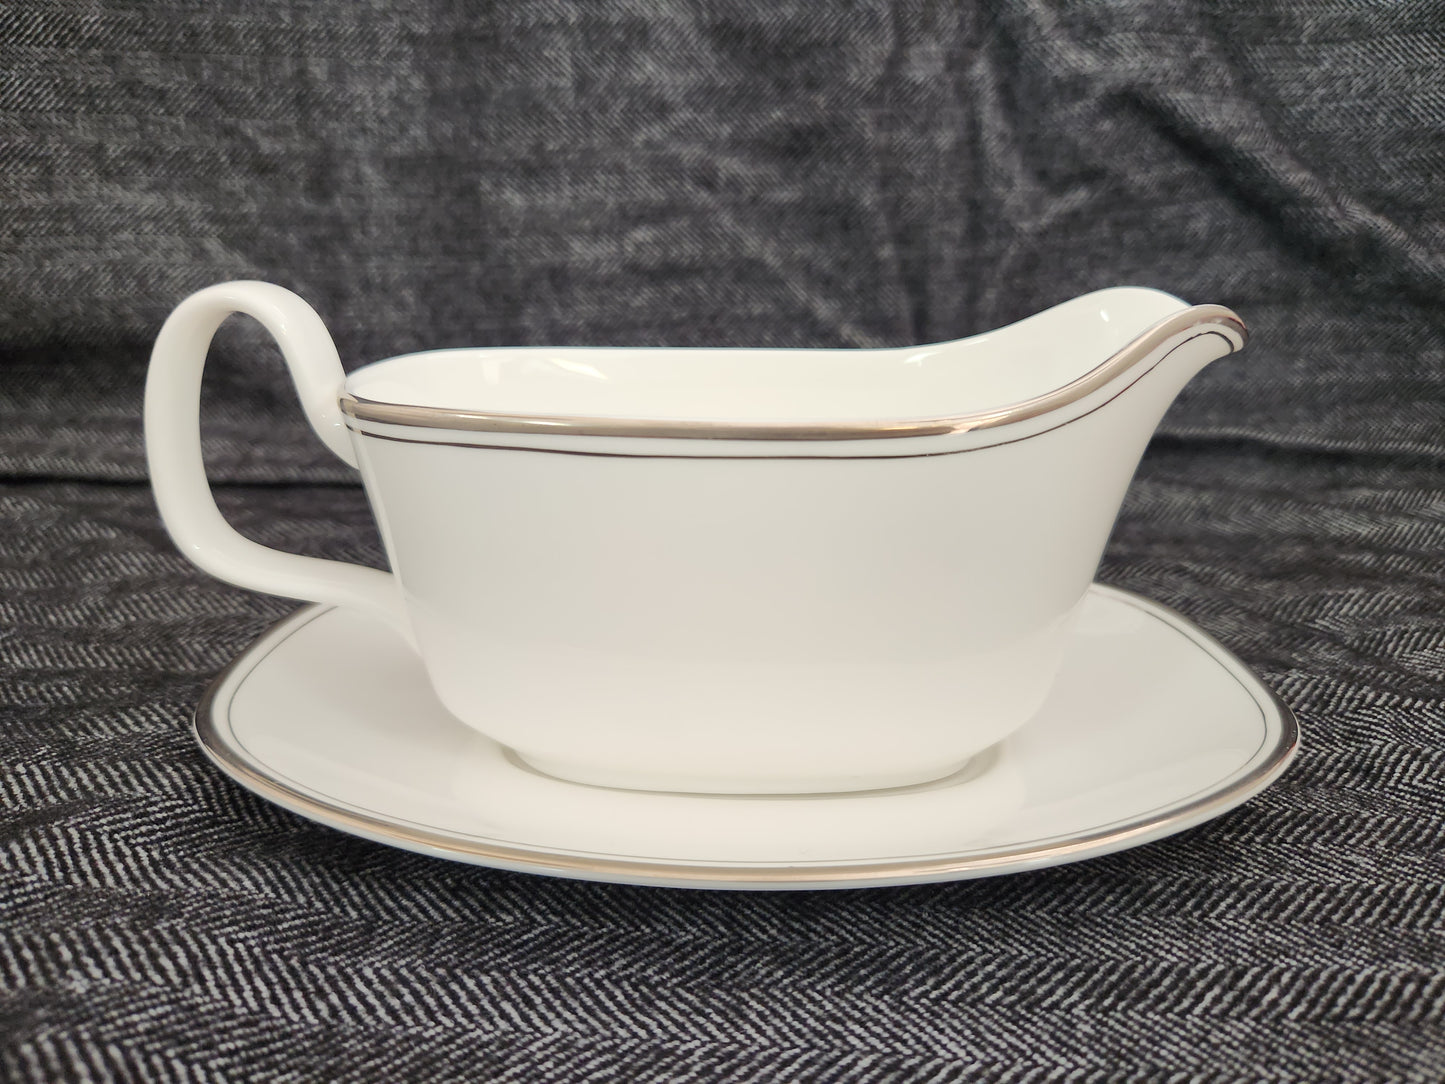 Concord Platinum Gravy Boat w/Underplate by Royal Doulton - #H5048